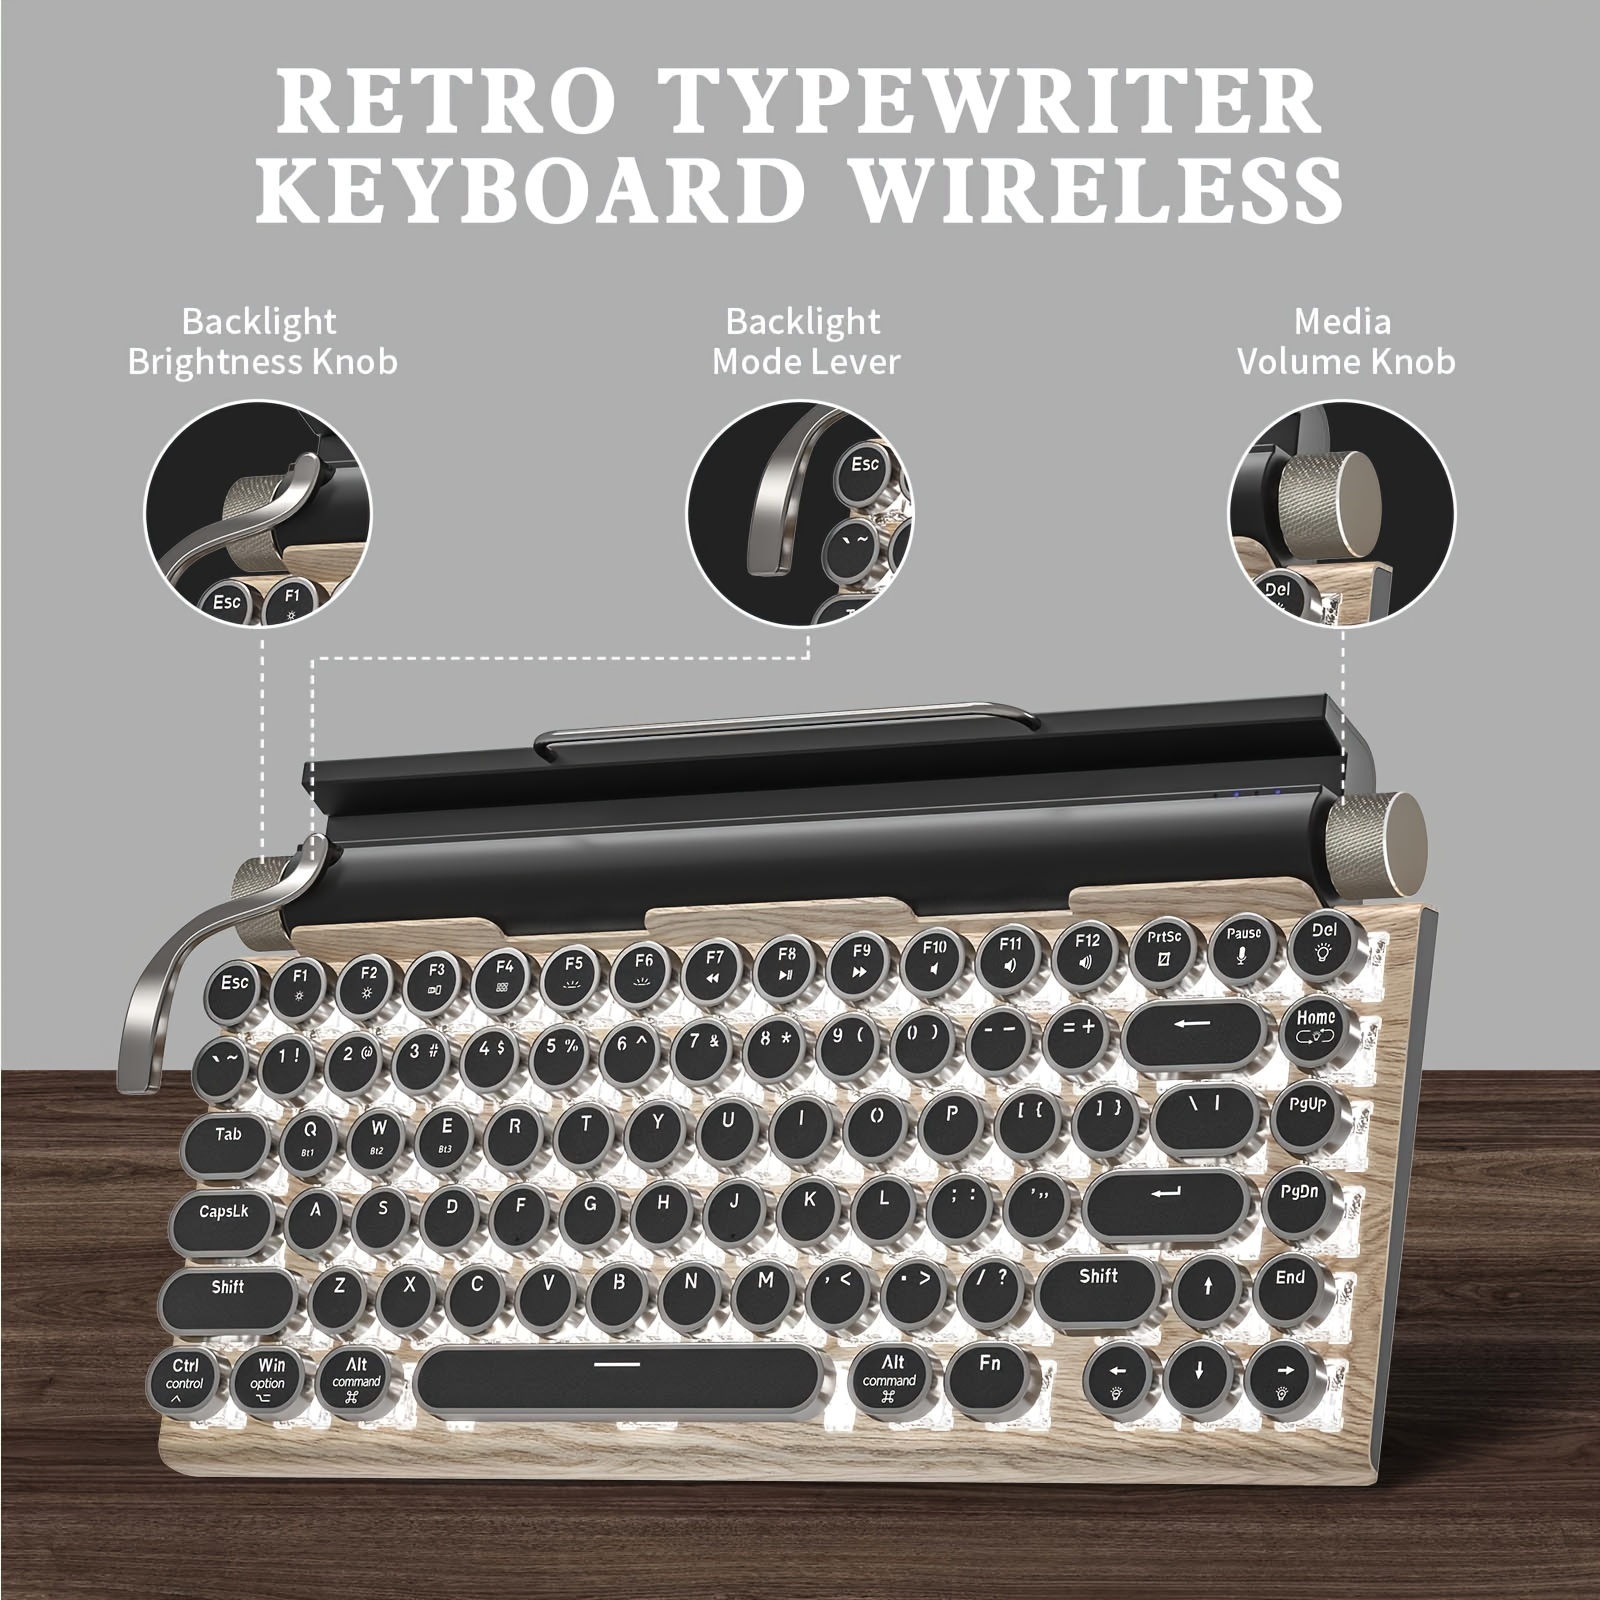 Retro Typist Keycaps - Bring Your Gaming Setup To The Next Level